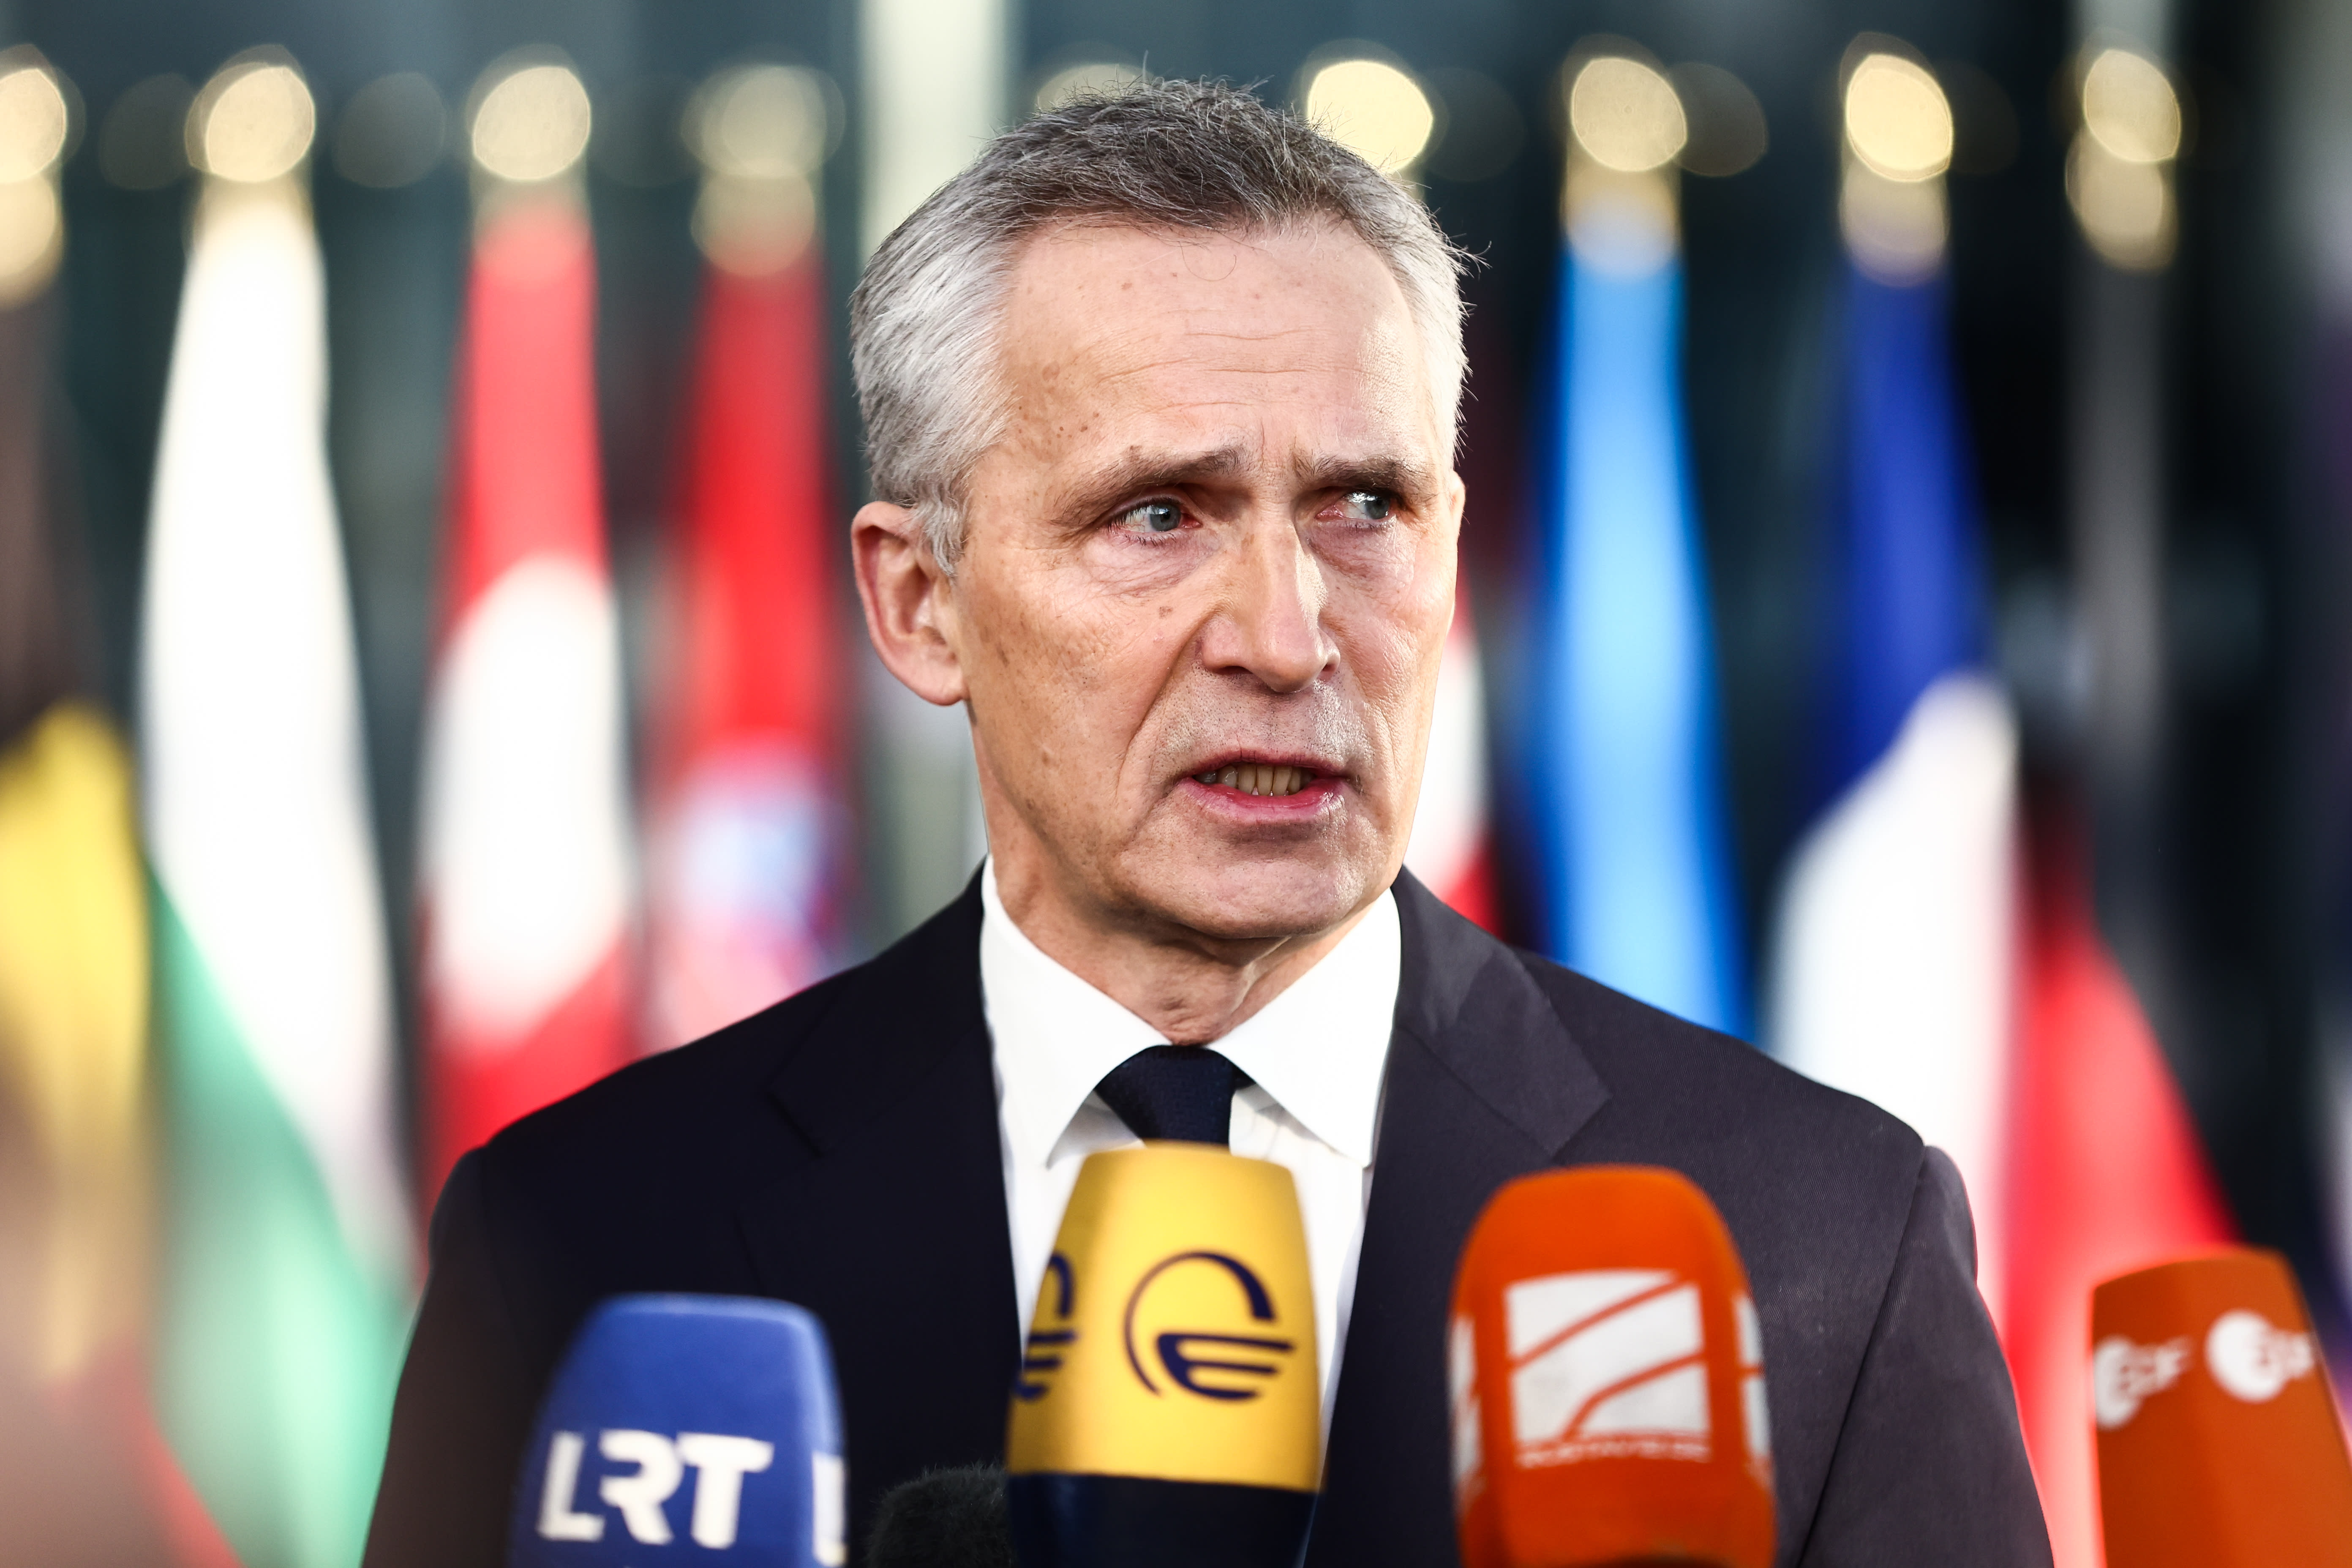 NATO chief: Reunification of Finland and Sweden is not a primary concern